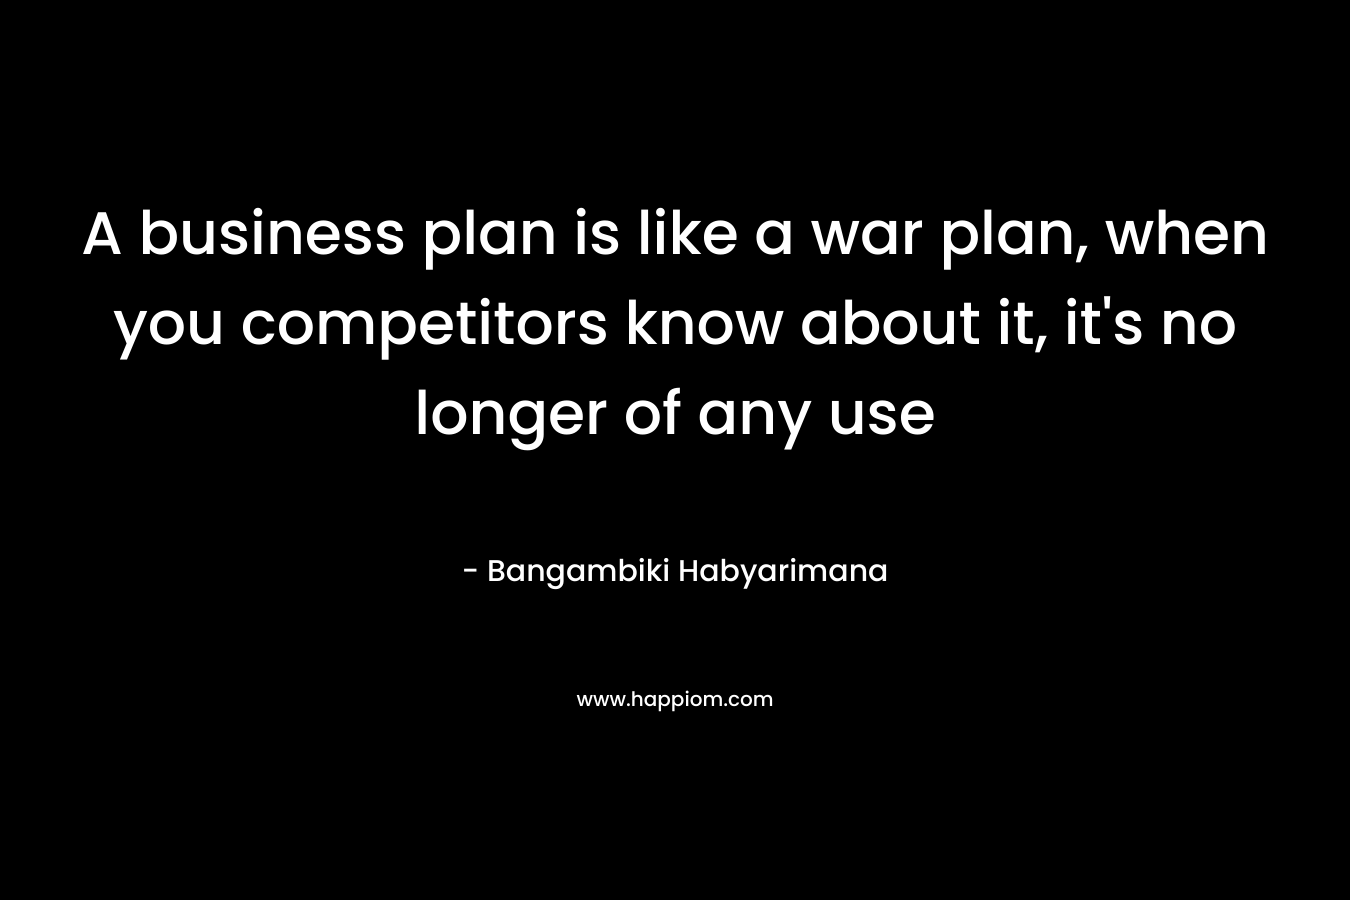 A business plan is like a war plan, when you competitors know about it, it's no longer of any use